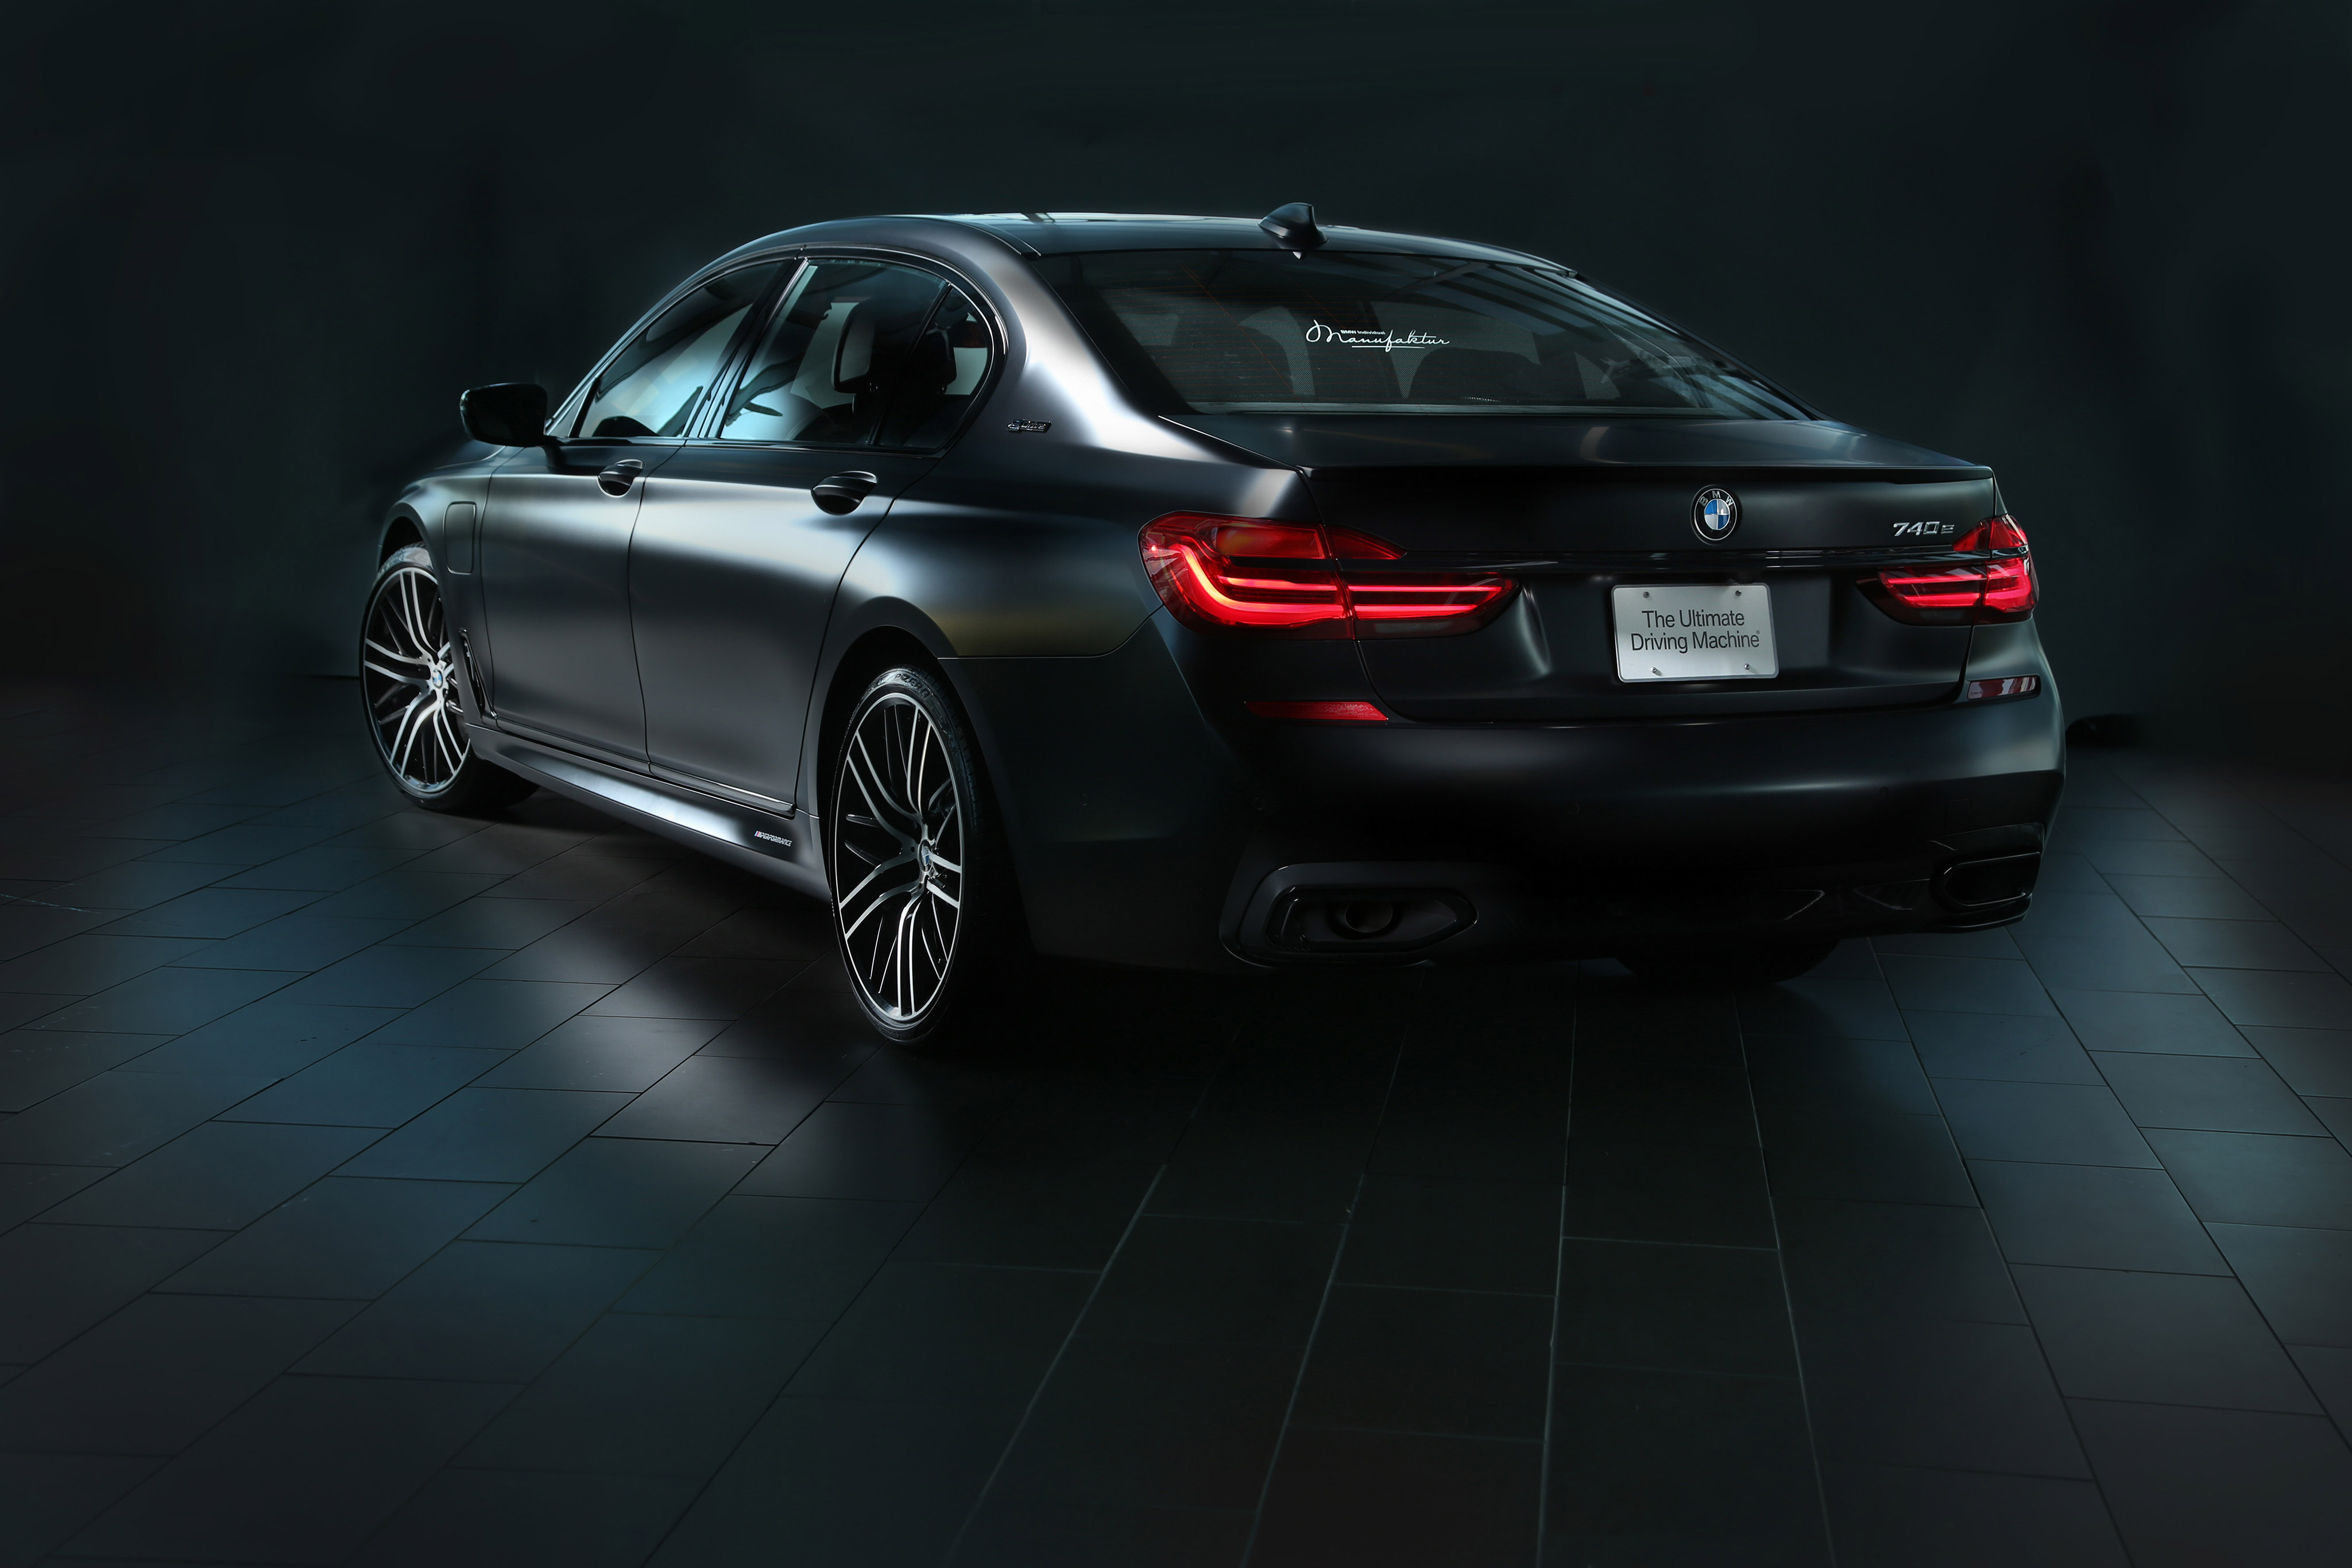 2017 BMW 740e IPerformance M Performance Rear, HD Cars, 4k Wallpapers,  Images, Backgrounds, Photos and Pictures